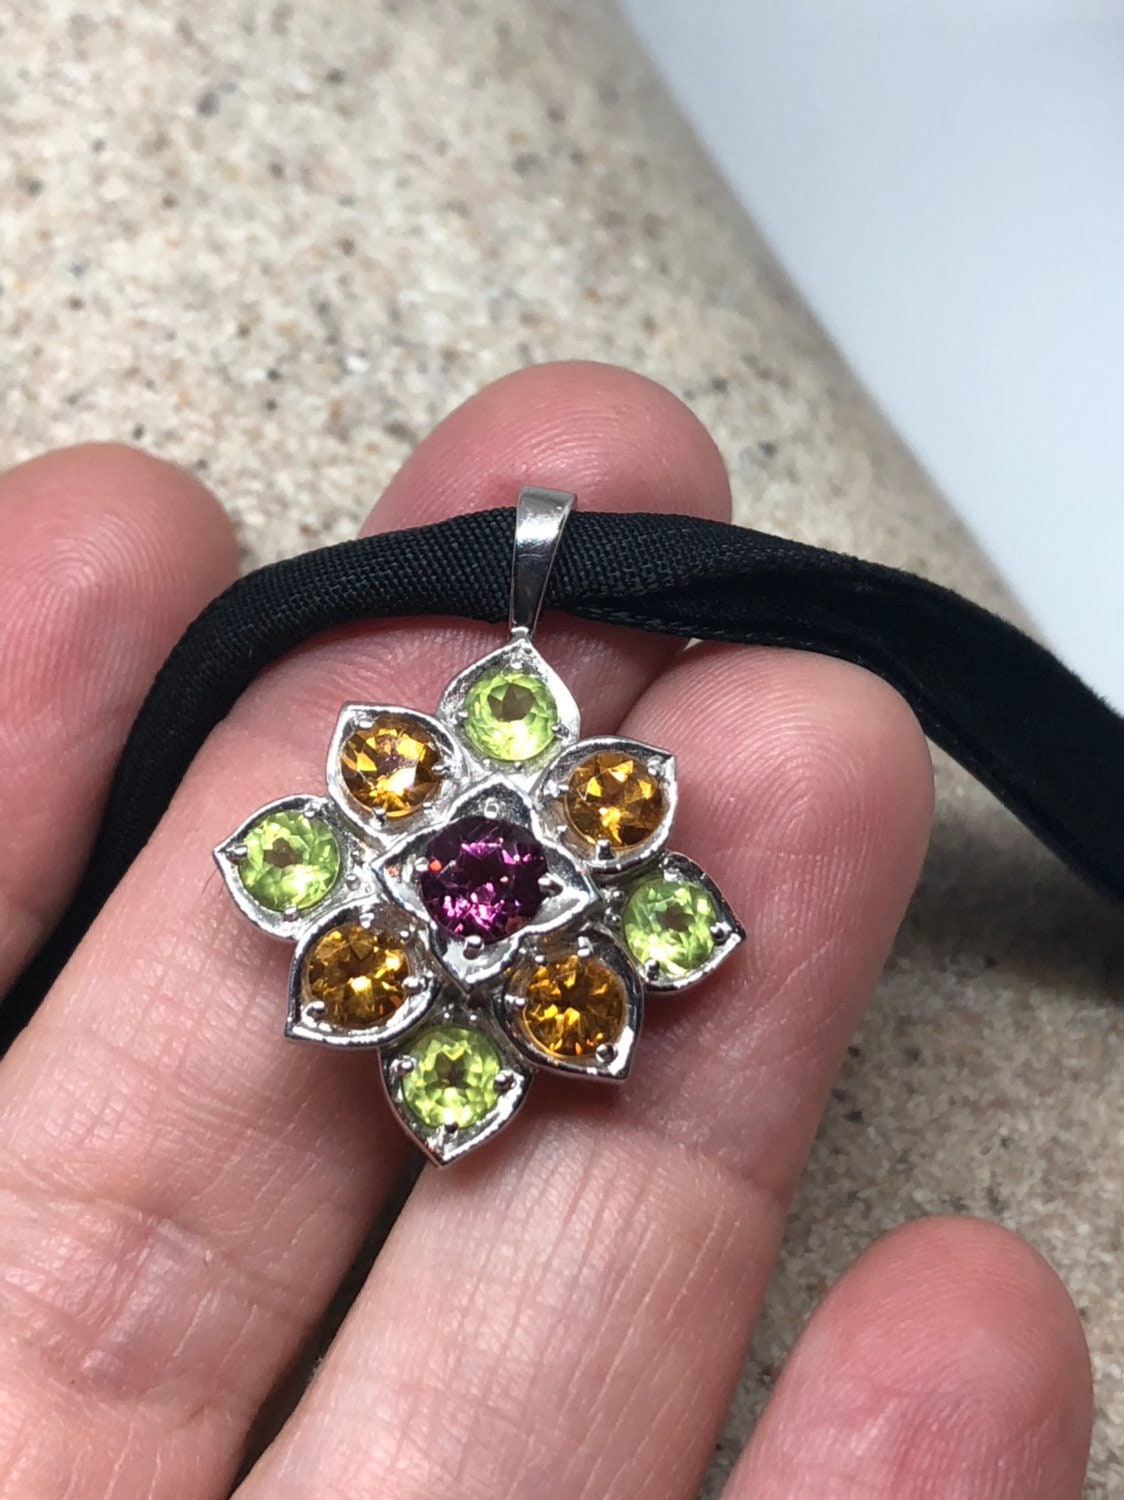 Vintage Handmade 925 Sterling Silver Genuine Citrine Peridot and tourmaline Antique Pendant Necklace